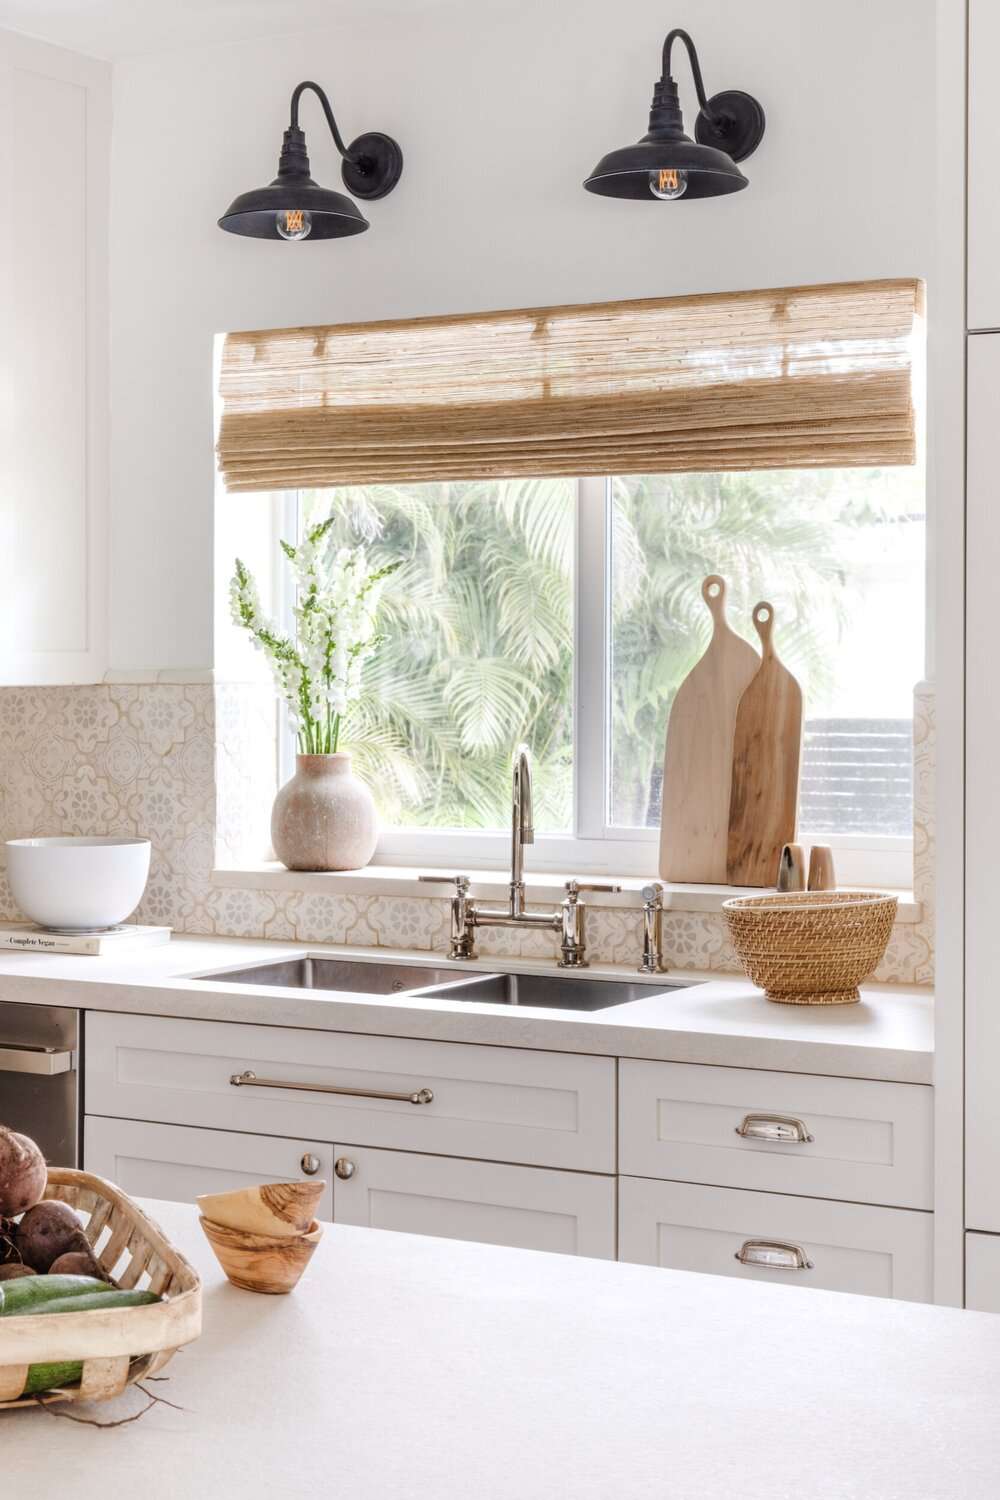 Wood Accent Decor For Kitchen Window Over Sink